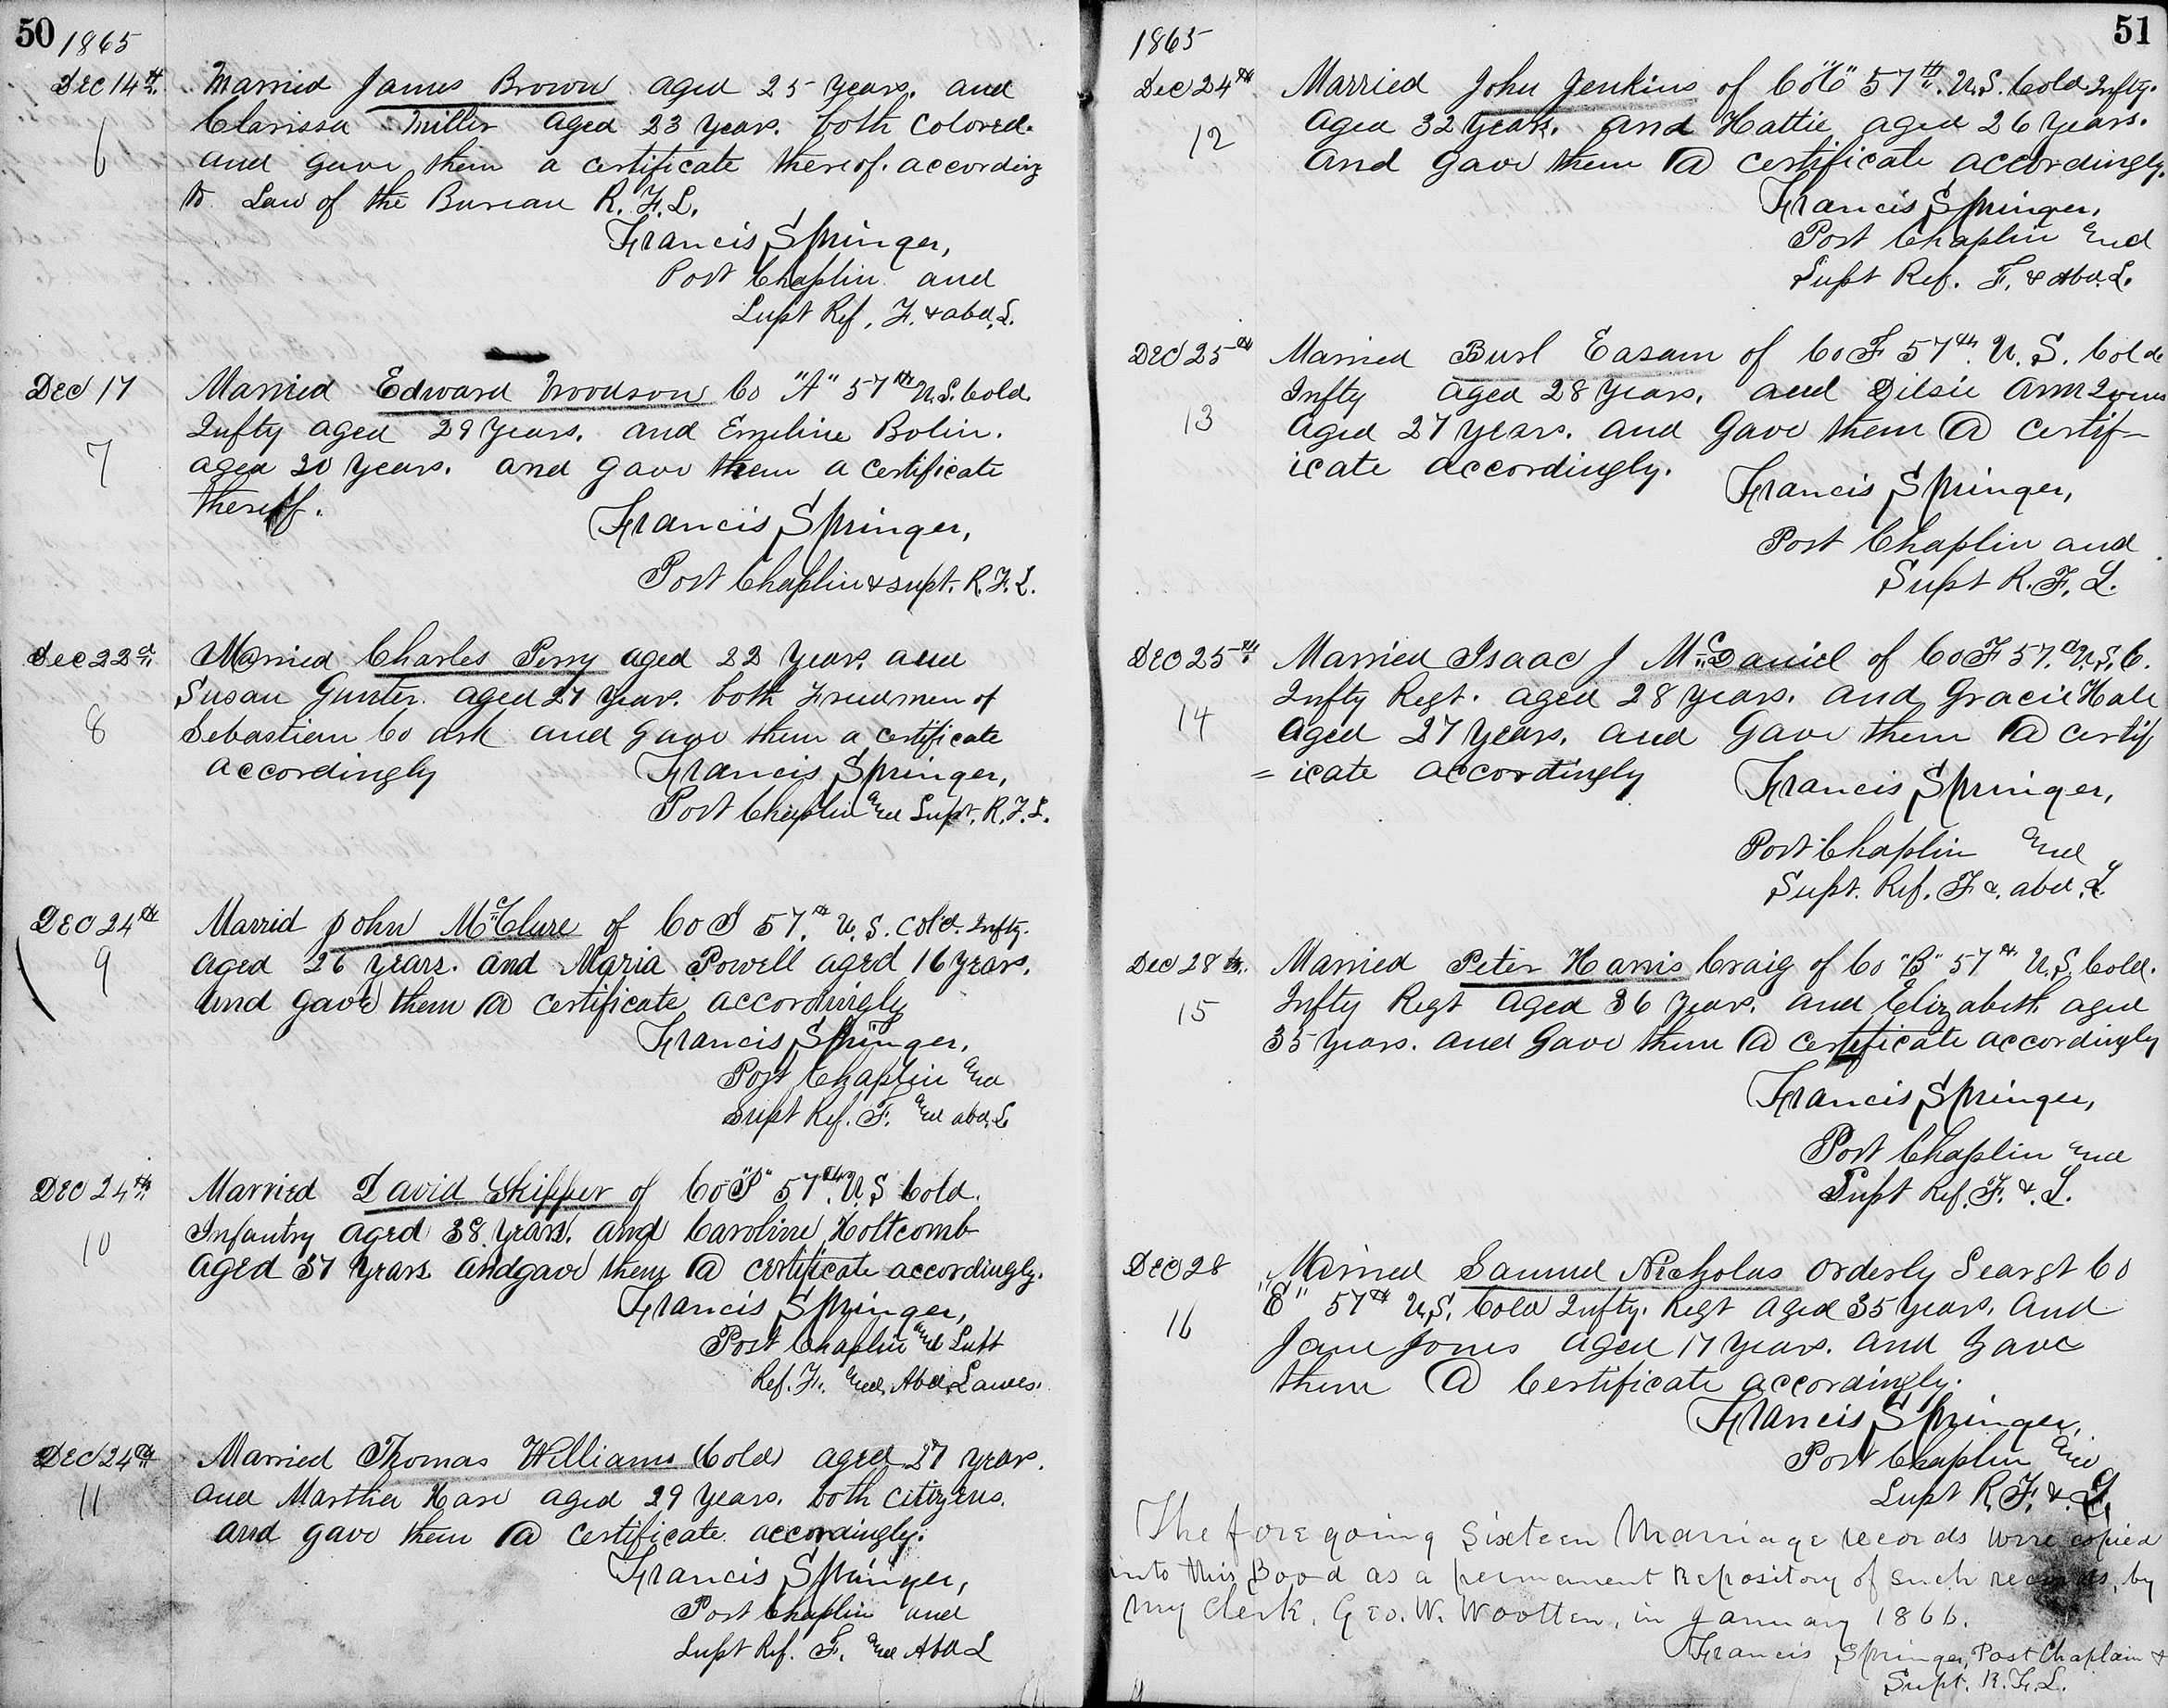 A two page spread of a marriage registrations from various dates in December. Each registration is handwritten and in small paragraph.